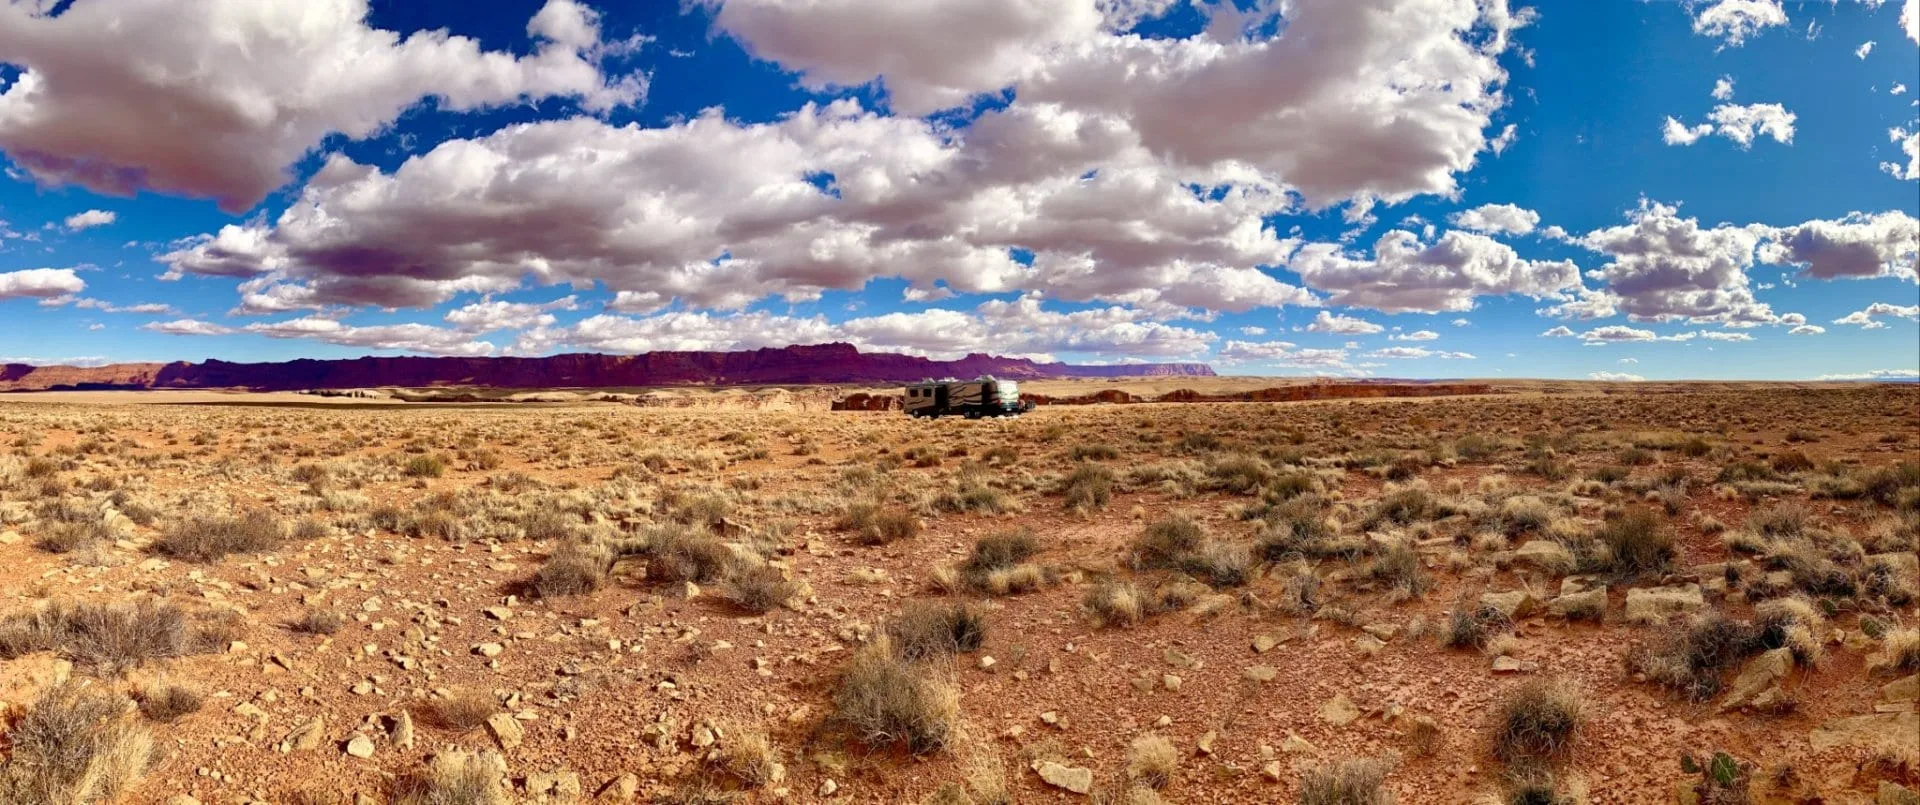 Us dry camping in the desert southwest on land controlled by the Bureau of Land Management.